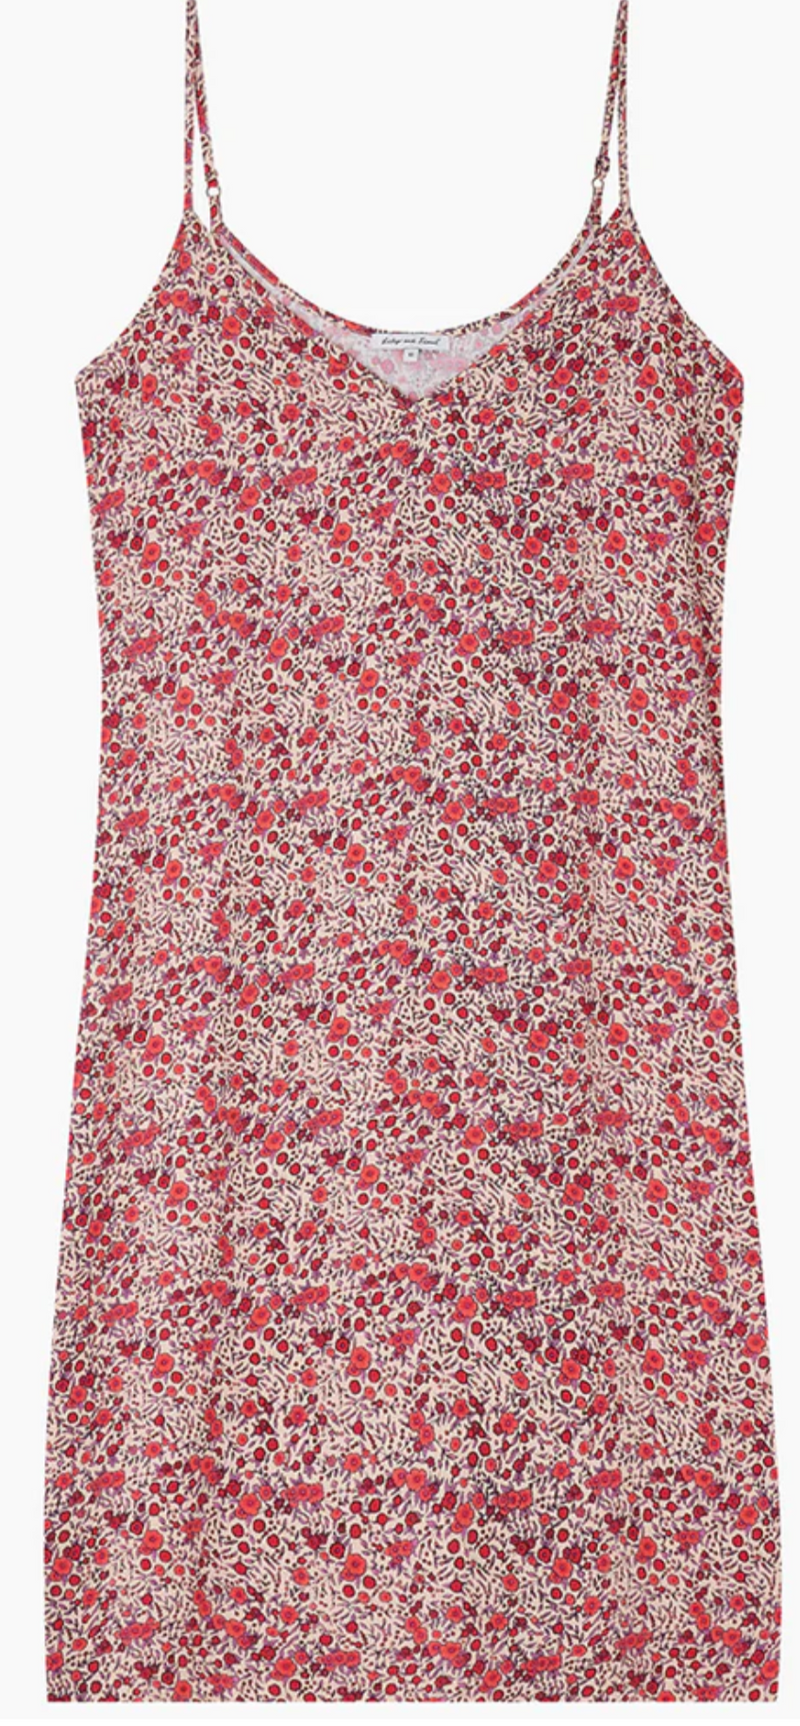 LILY AND LIONEL ROSIE SLIP DRESS VISCOSE SATIN PINK ASTER LIBERTY PRINT